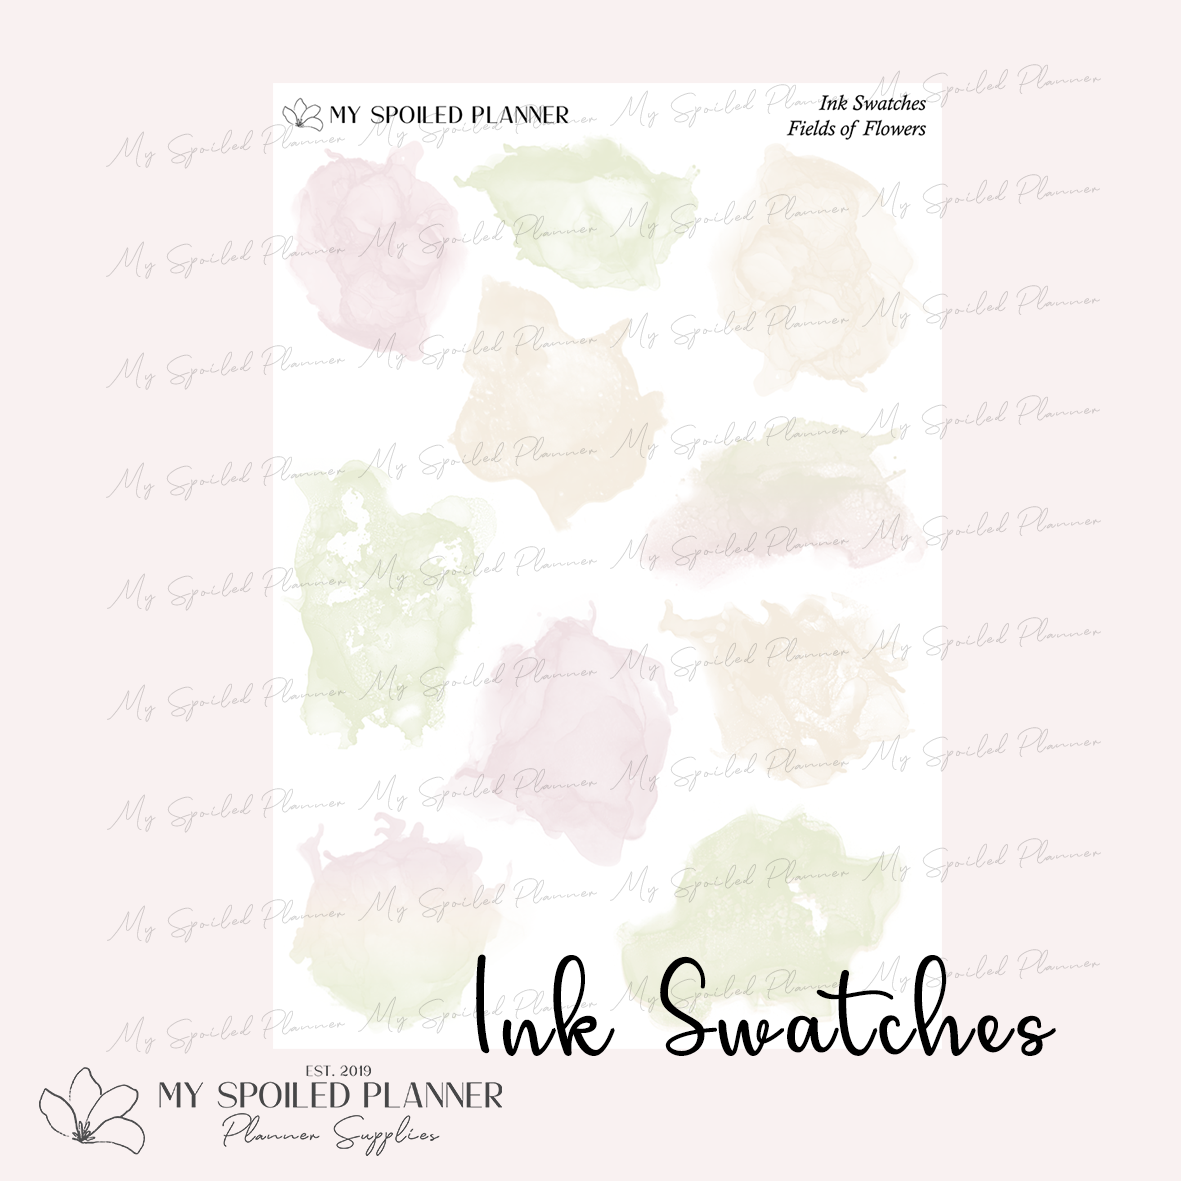 Fields of Flowers Ink Swatches